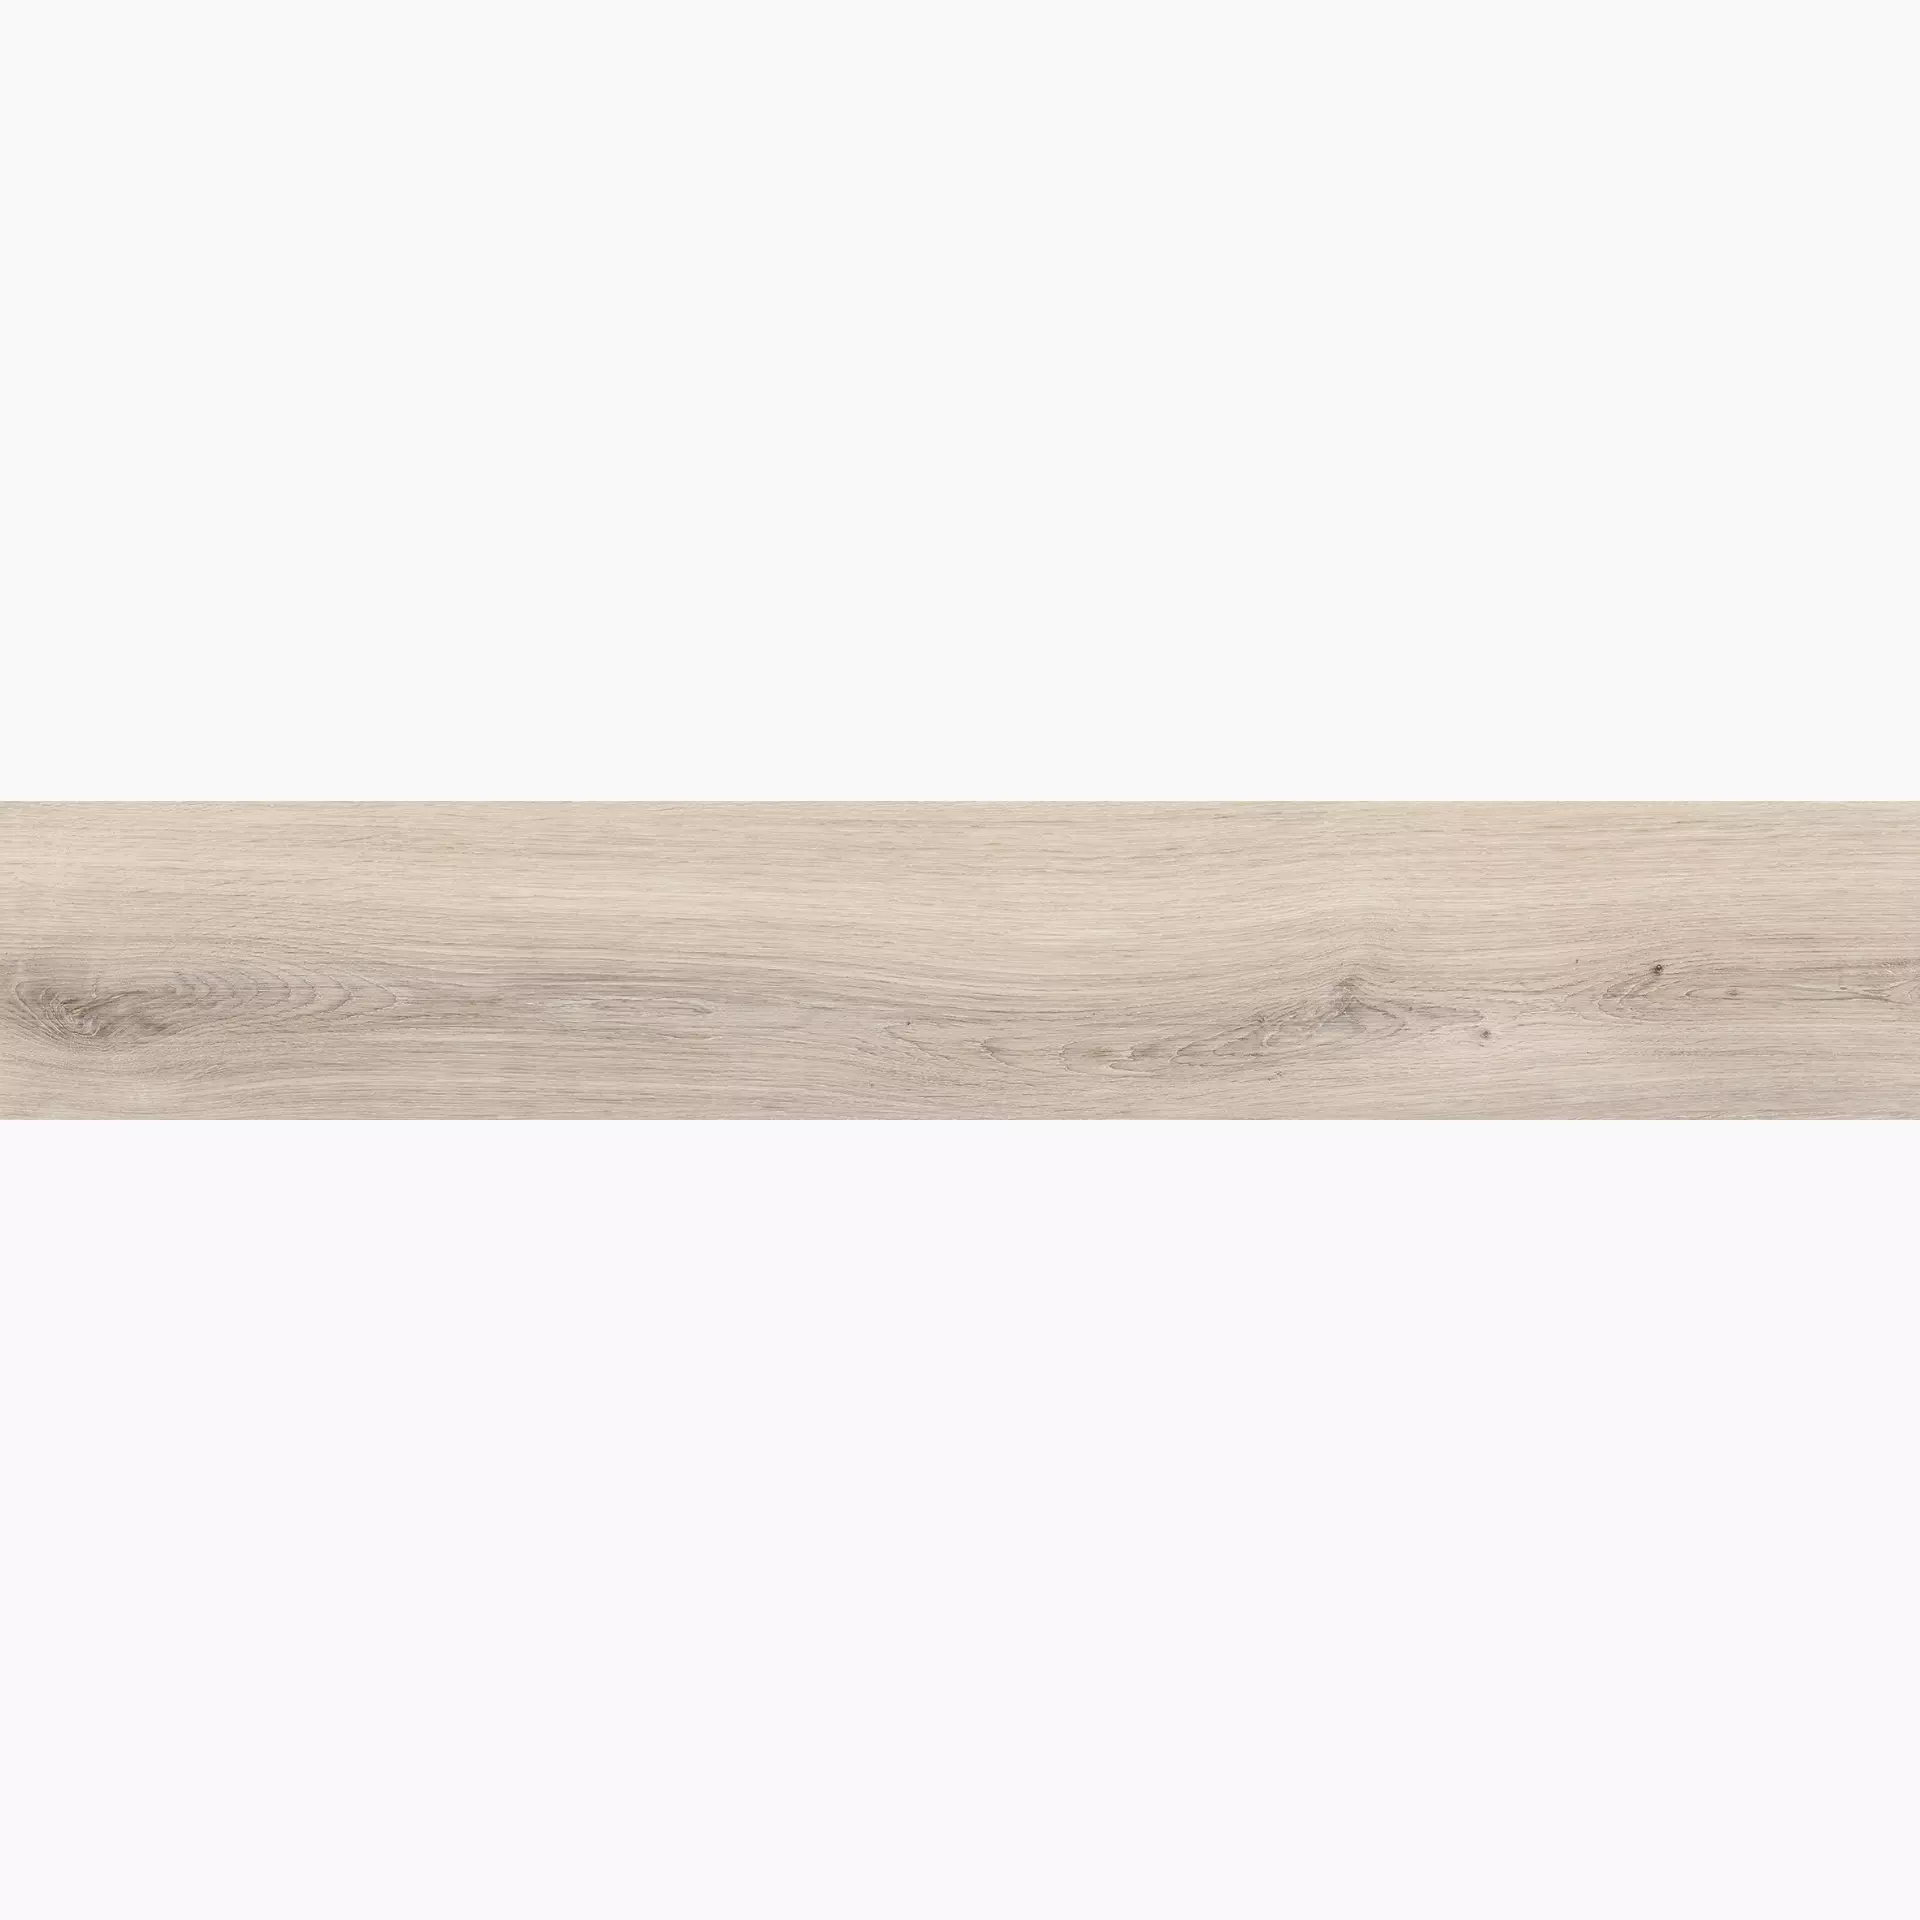 ABK Eco-Chic Almond Naturale PF60004938 20x120cm rectified 8,5mm